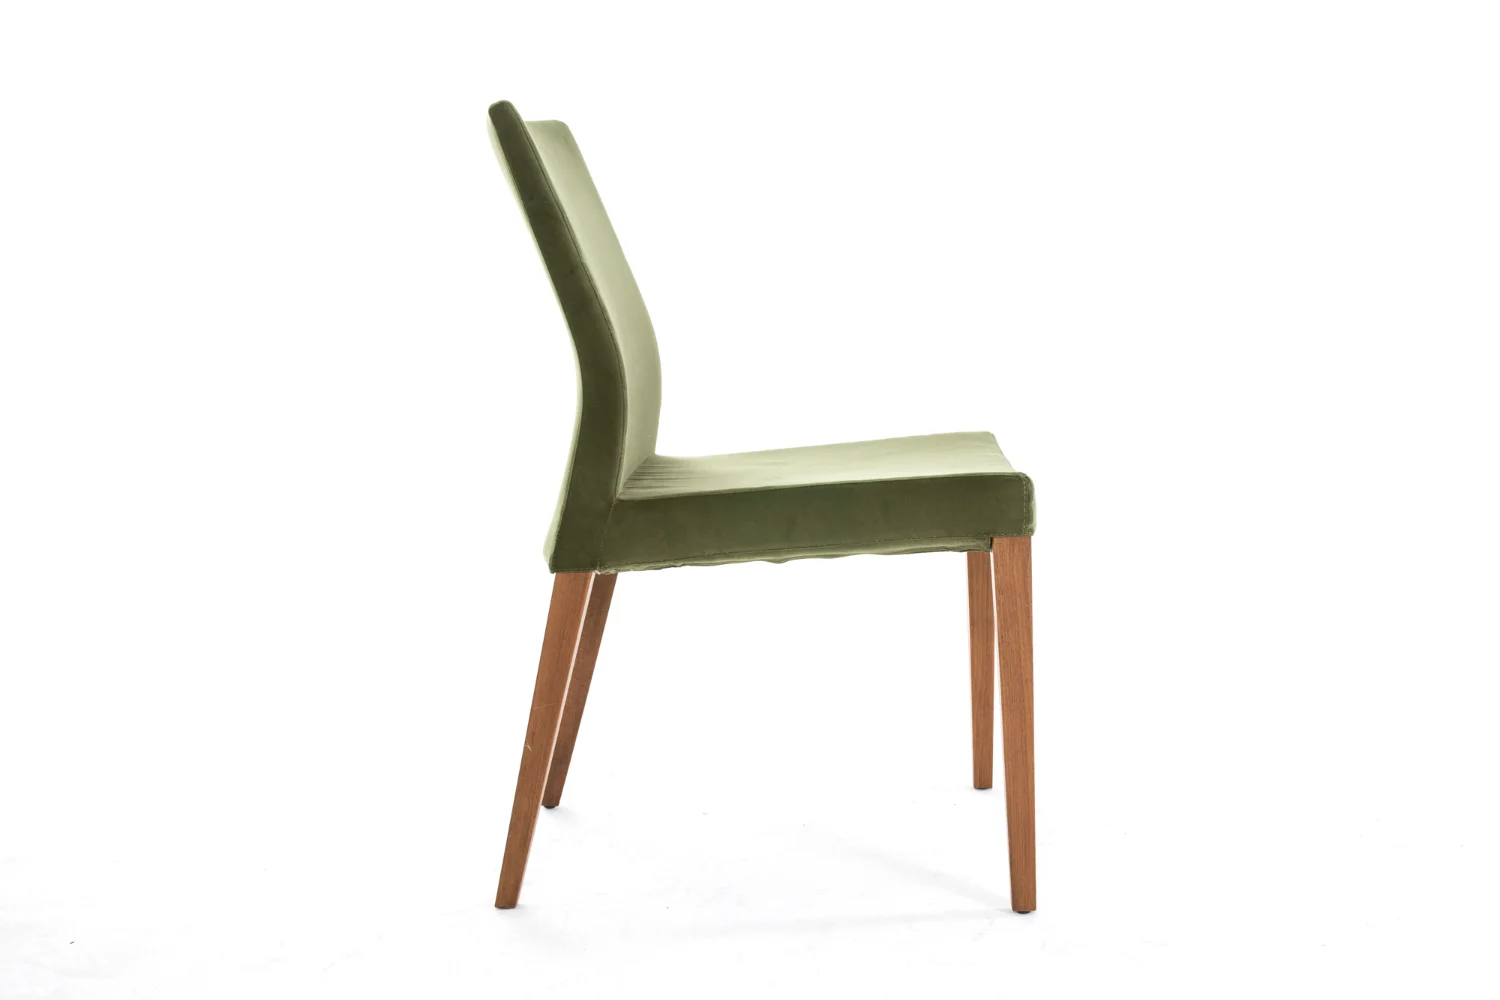 A green dining chair with wooden legs.